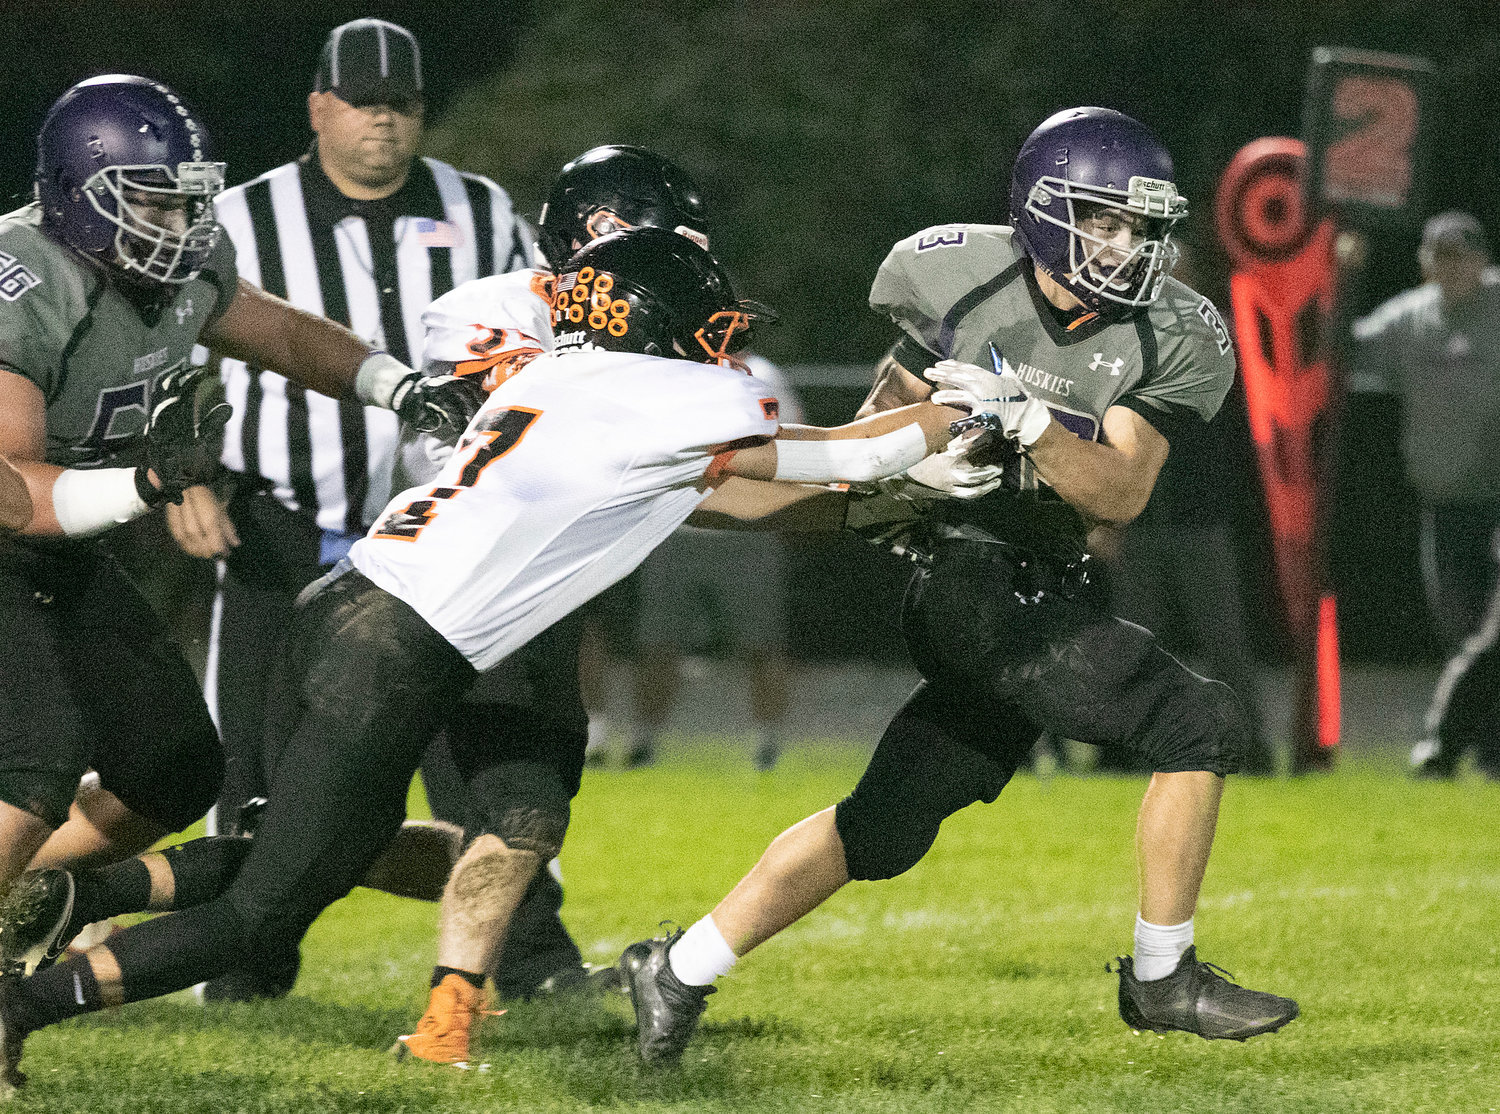 Mt. Hope’s Brock Pacheco breaks away from a would-be tackler during a Huskies’ game this season.